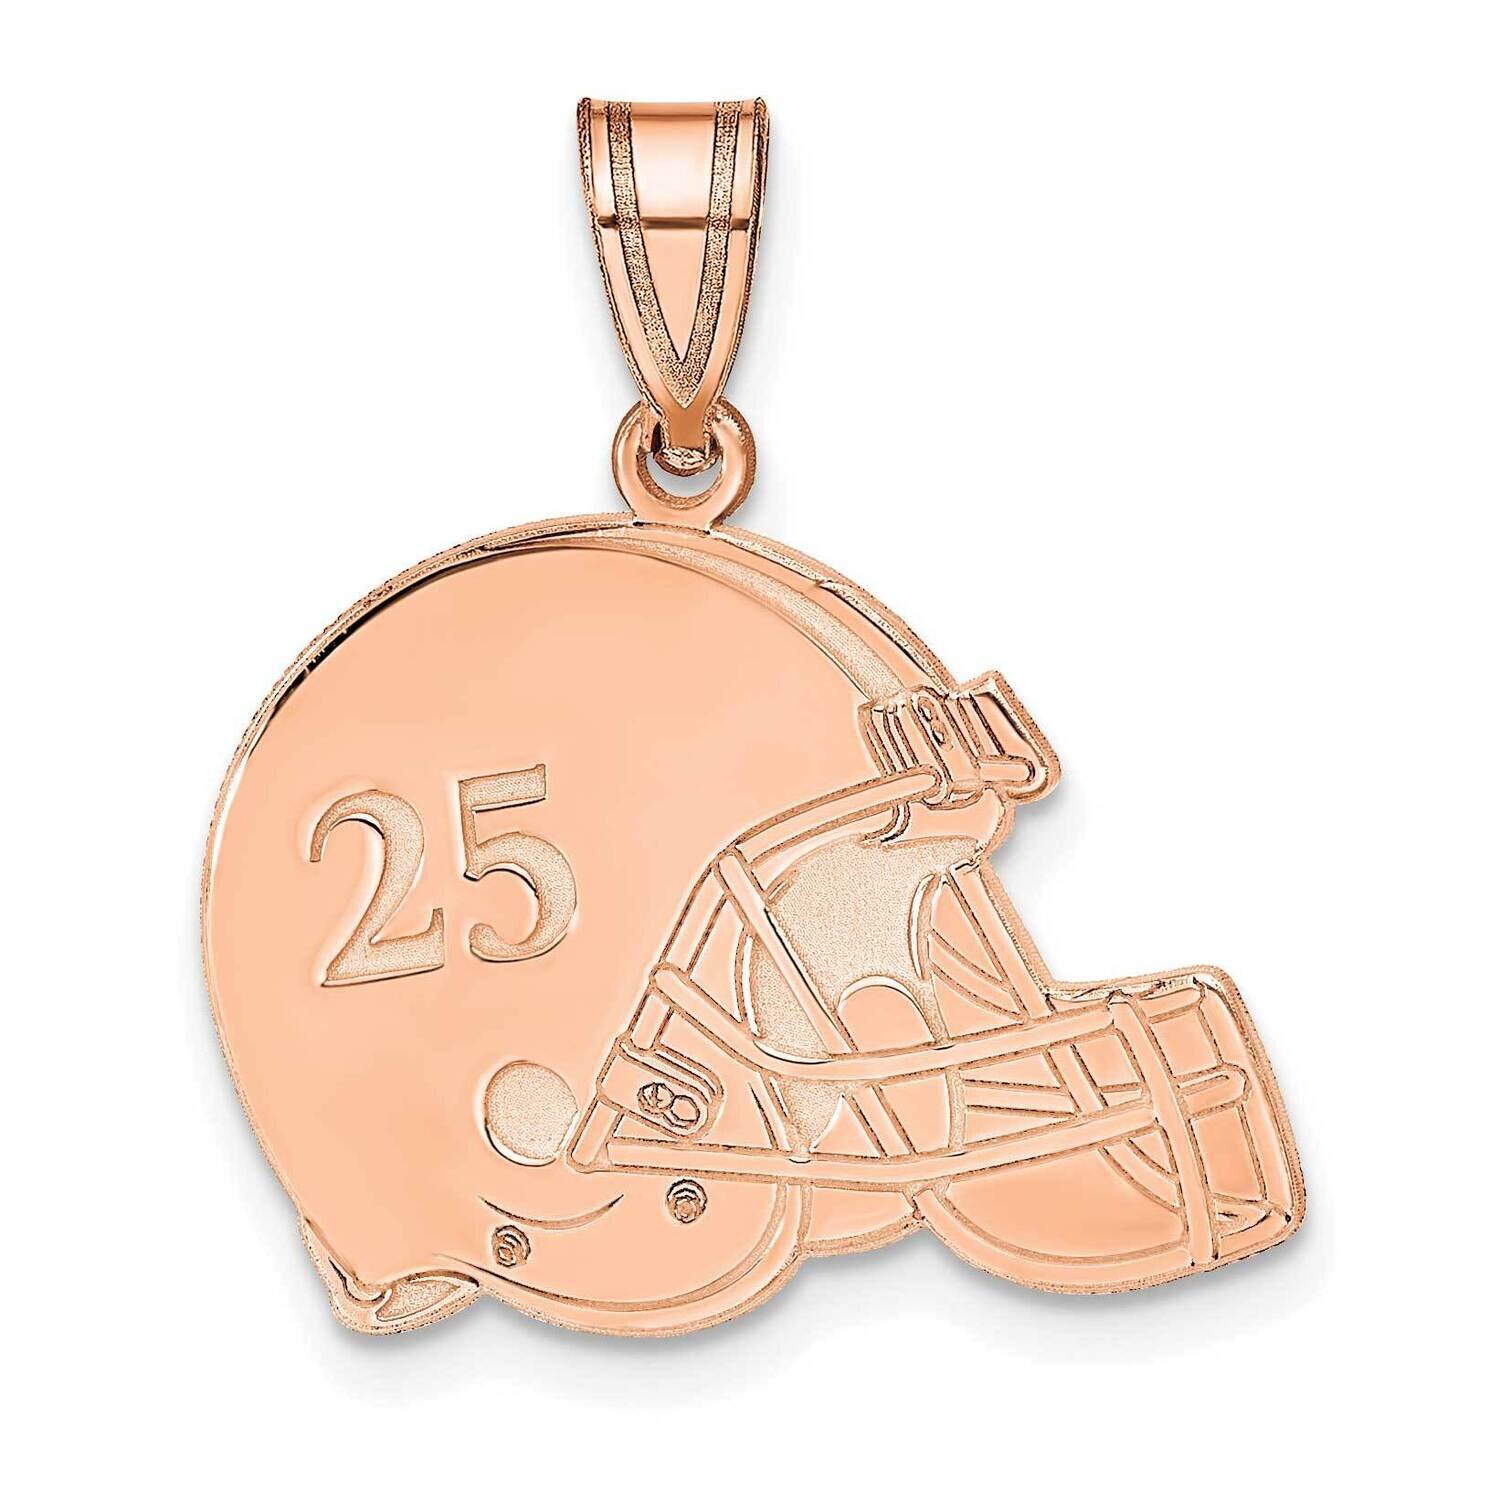 Personalized Football Helmet Pendant Sterling Silver Rose-plated XNA693RP